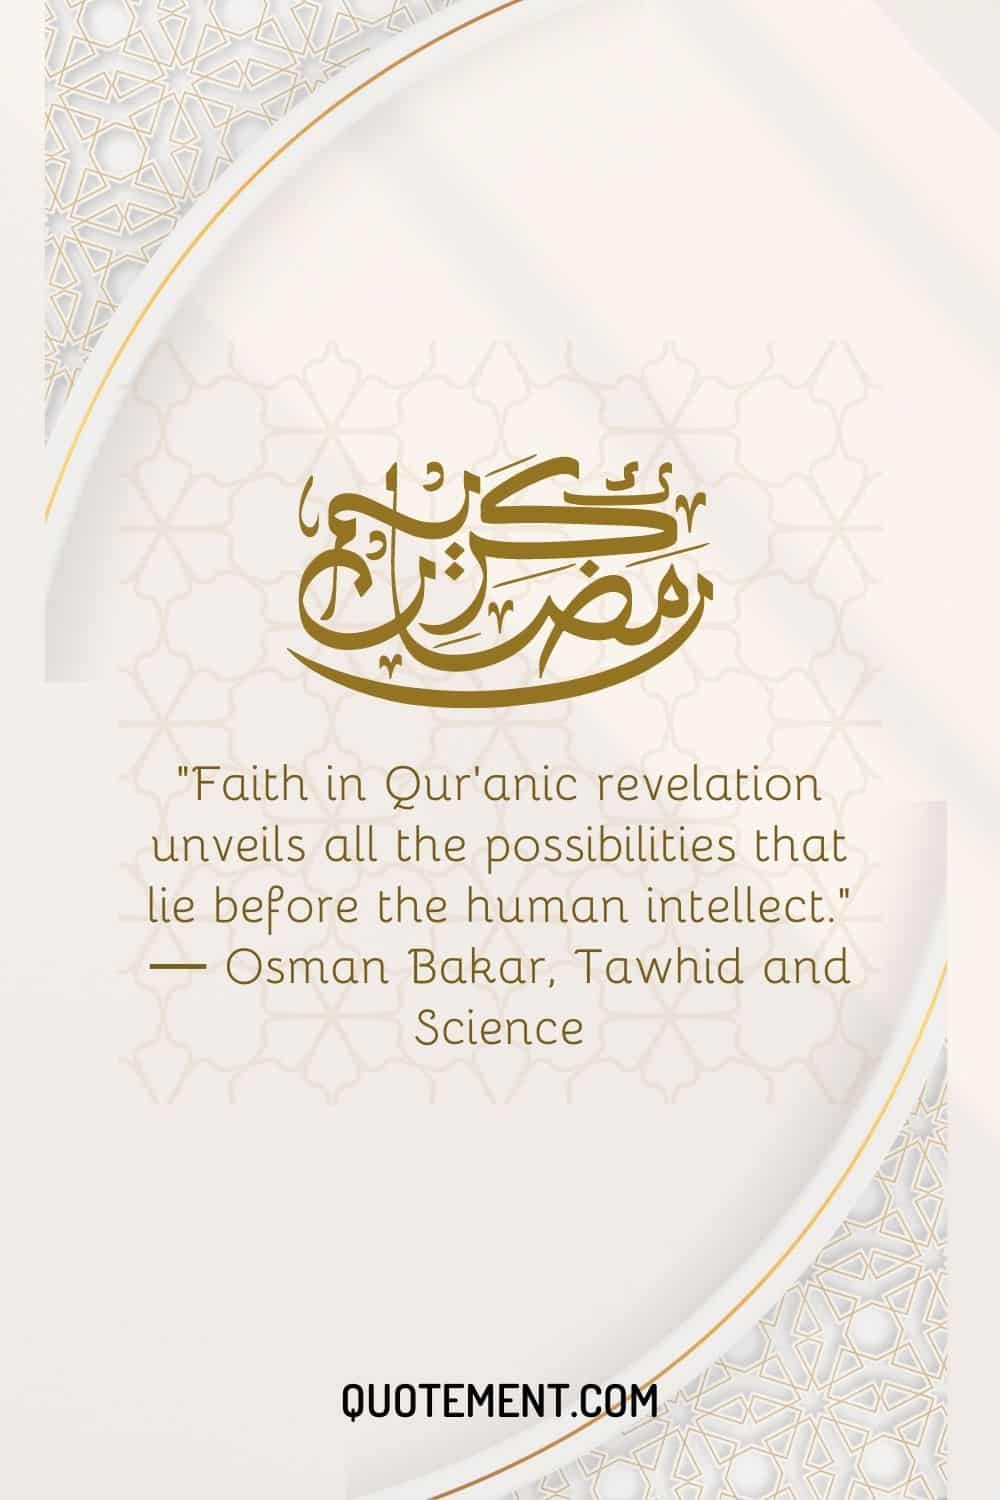 Faith in Qur'anic revelation unveils all the possibilities that lie before the human intellect